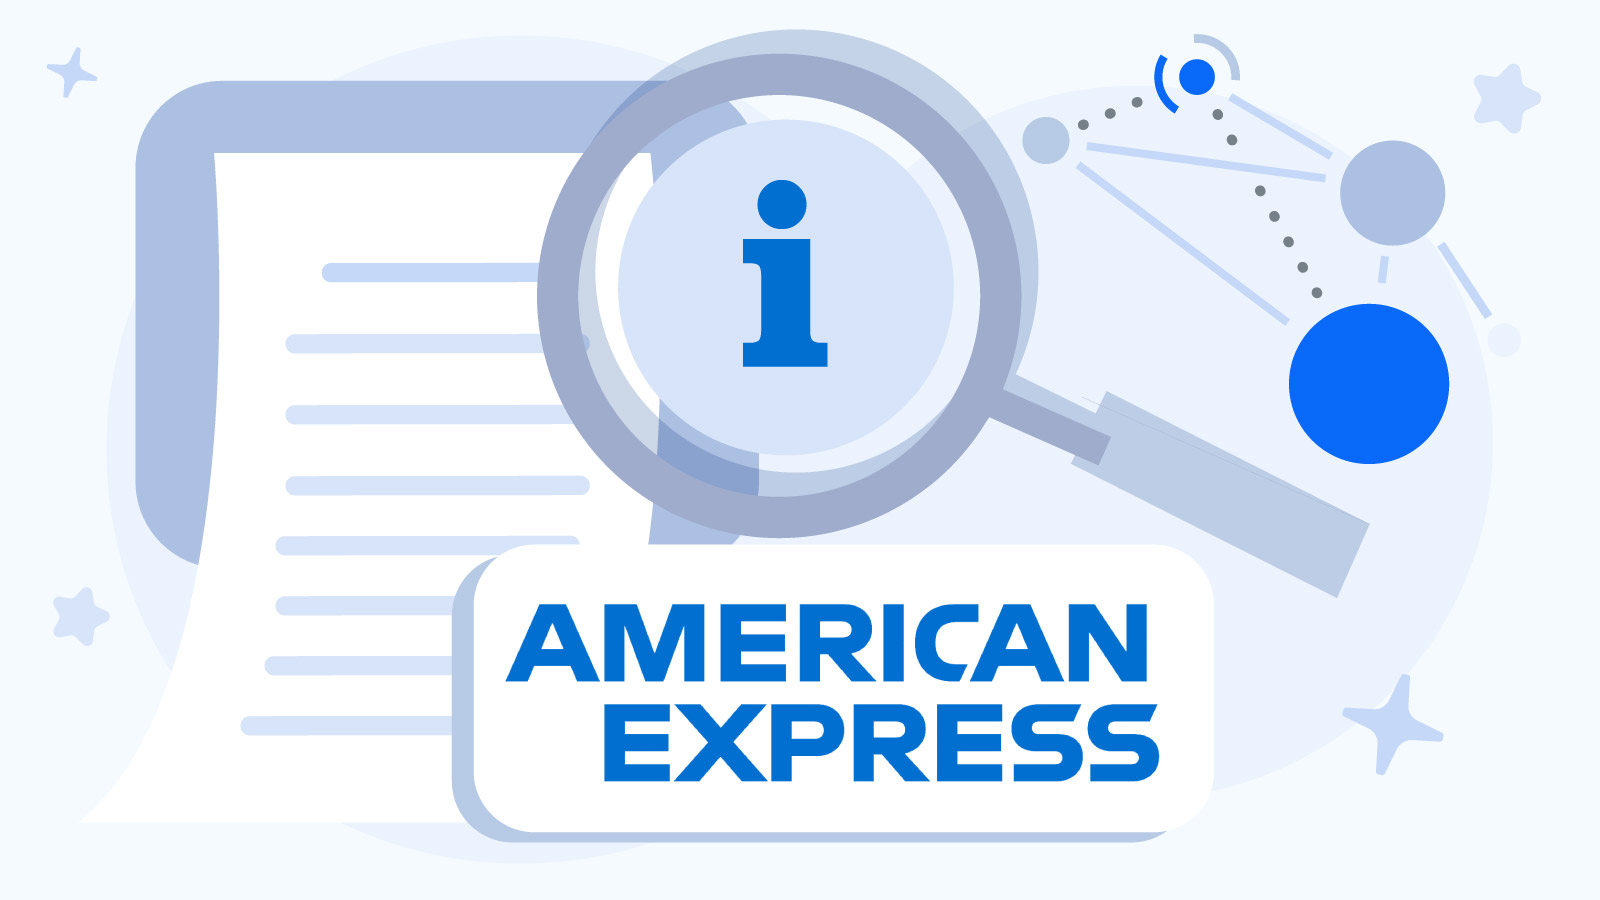 More-About-American-Express